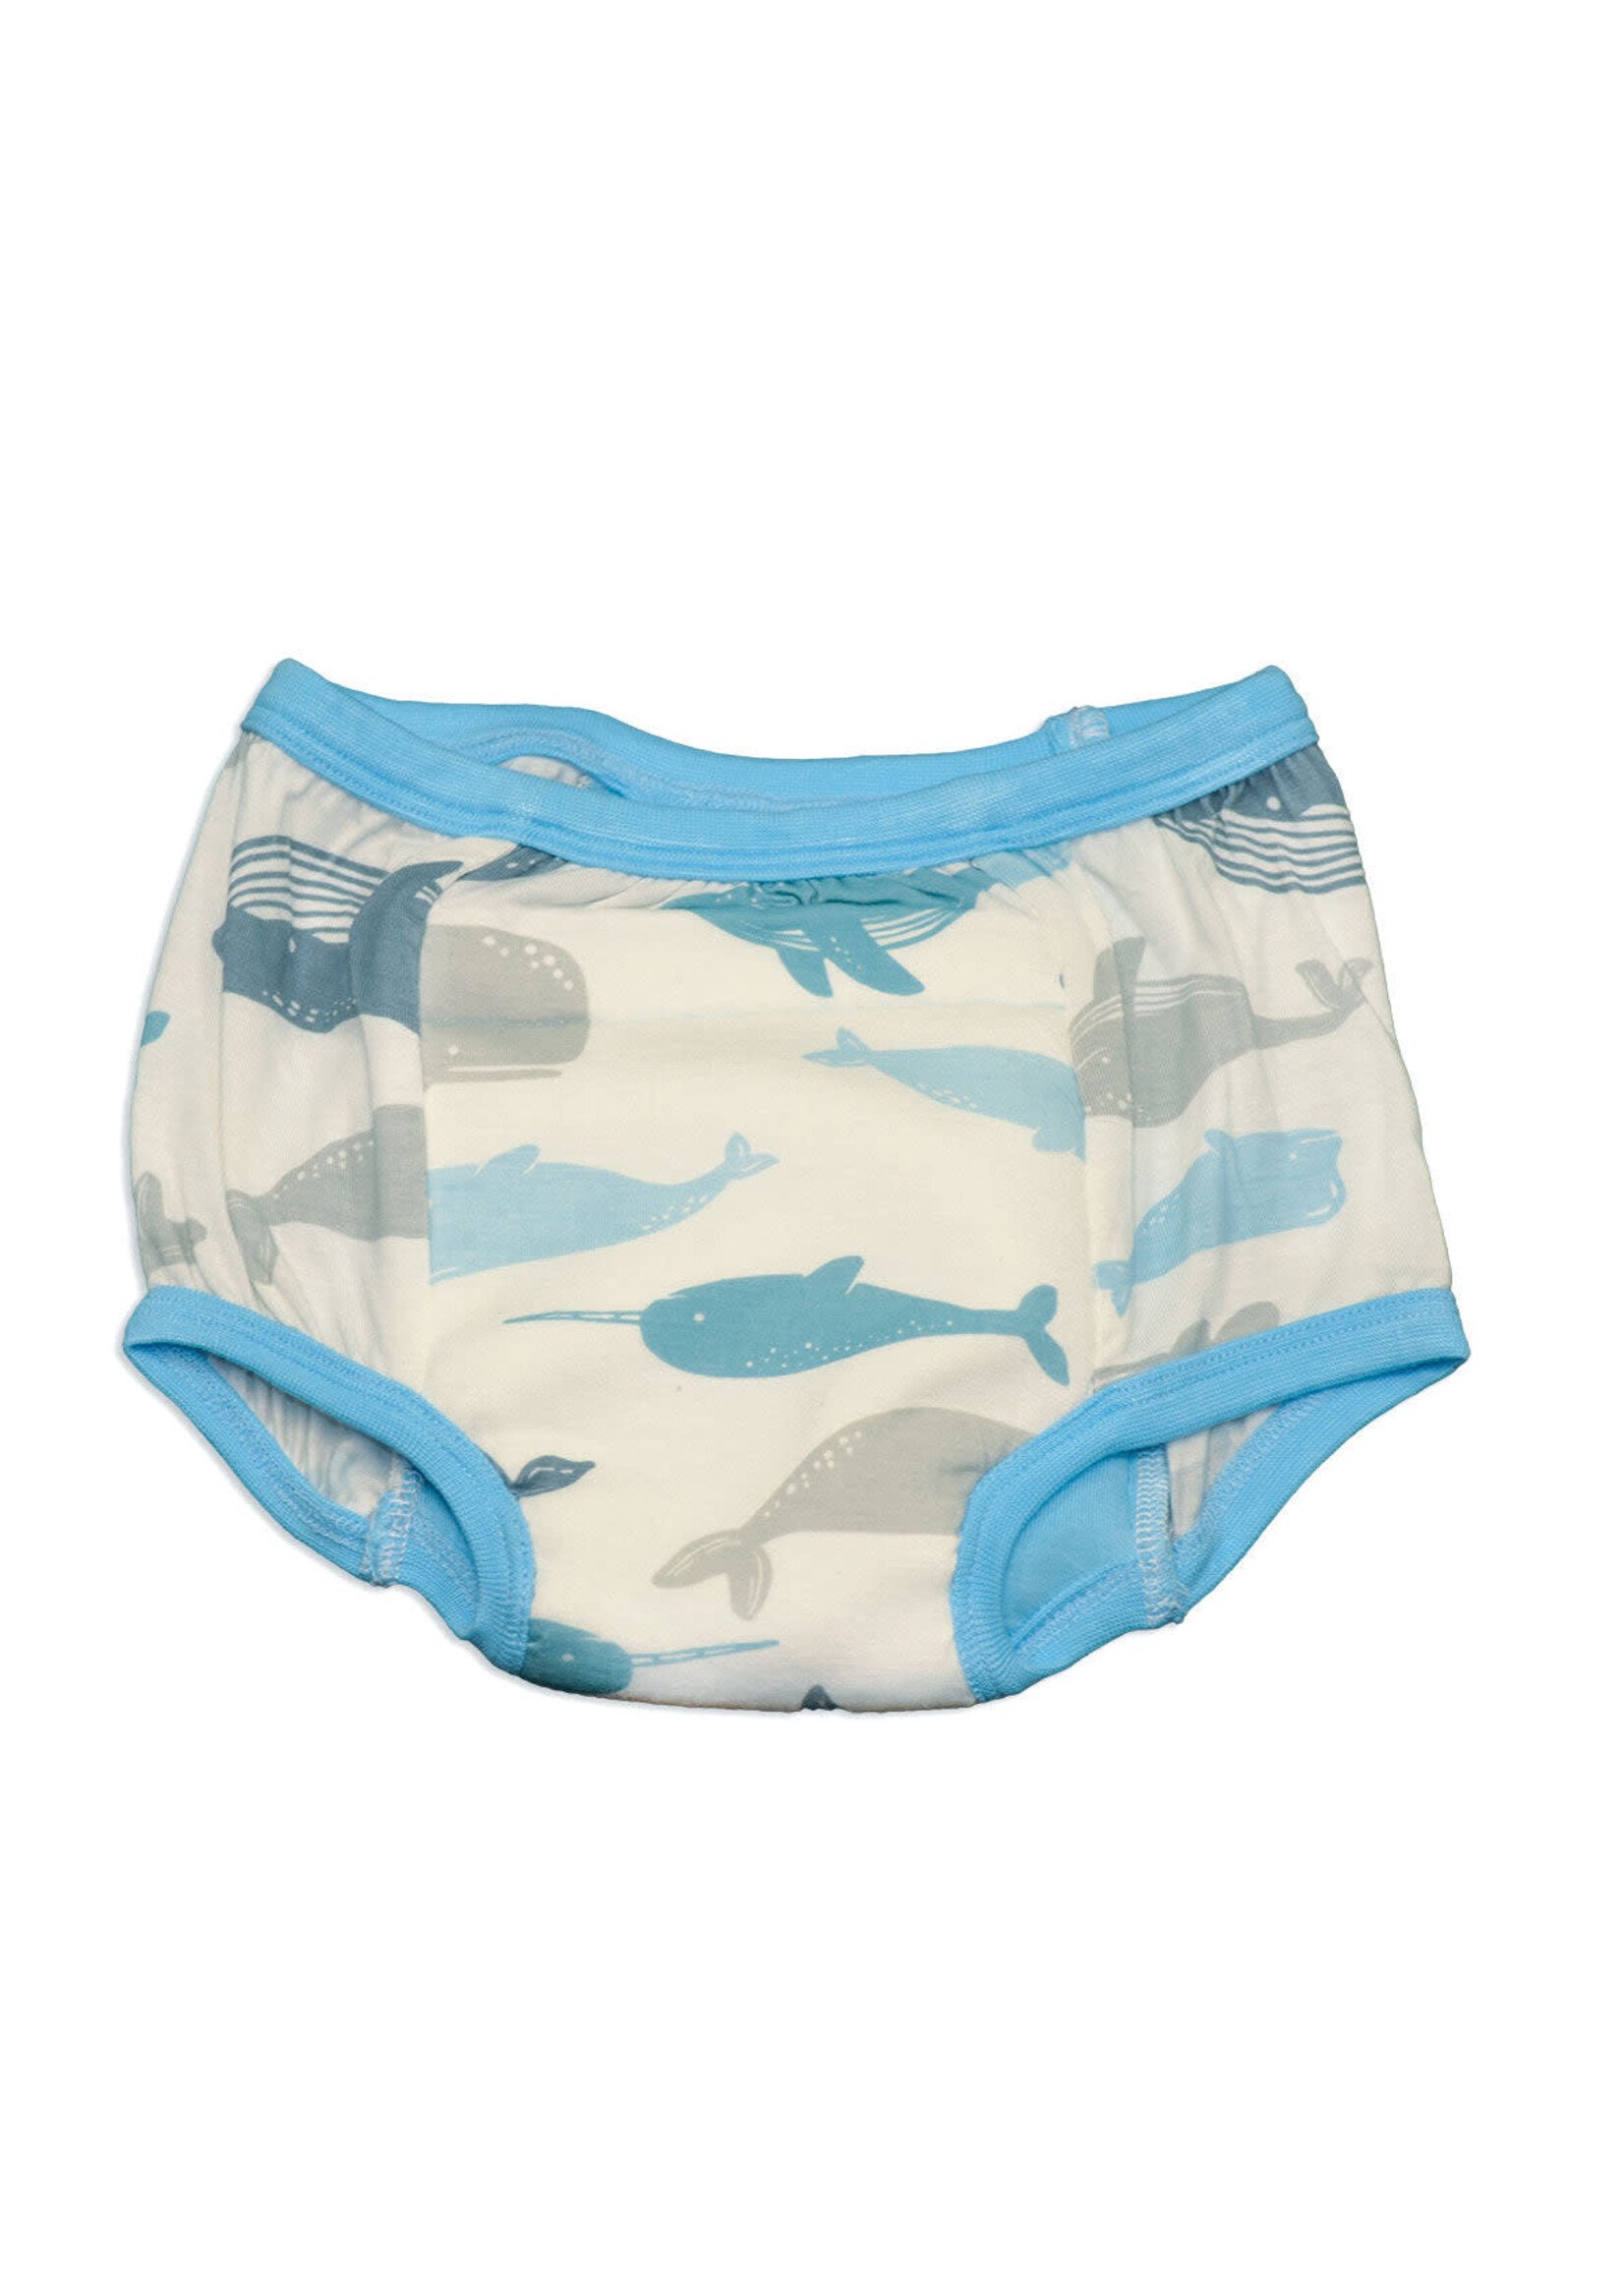 Silkberry Baby Silkberry Baby Bamboo Training Pants- Whale Of A Time